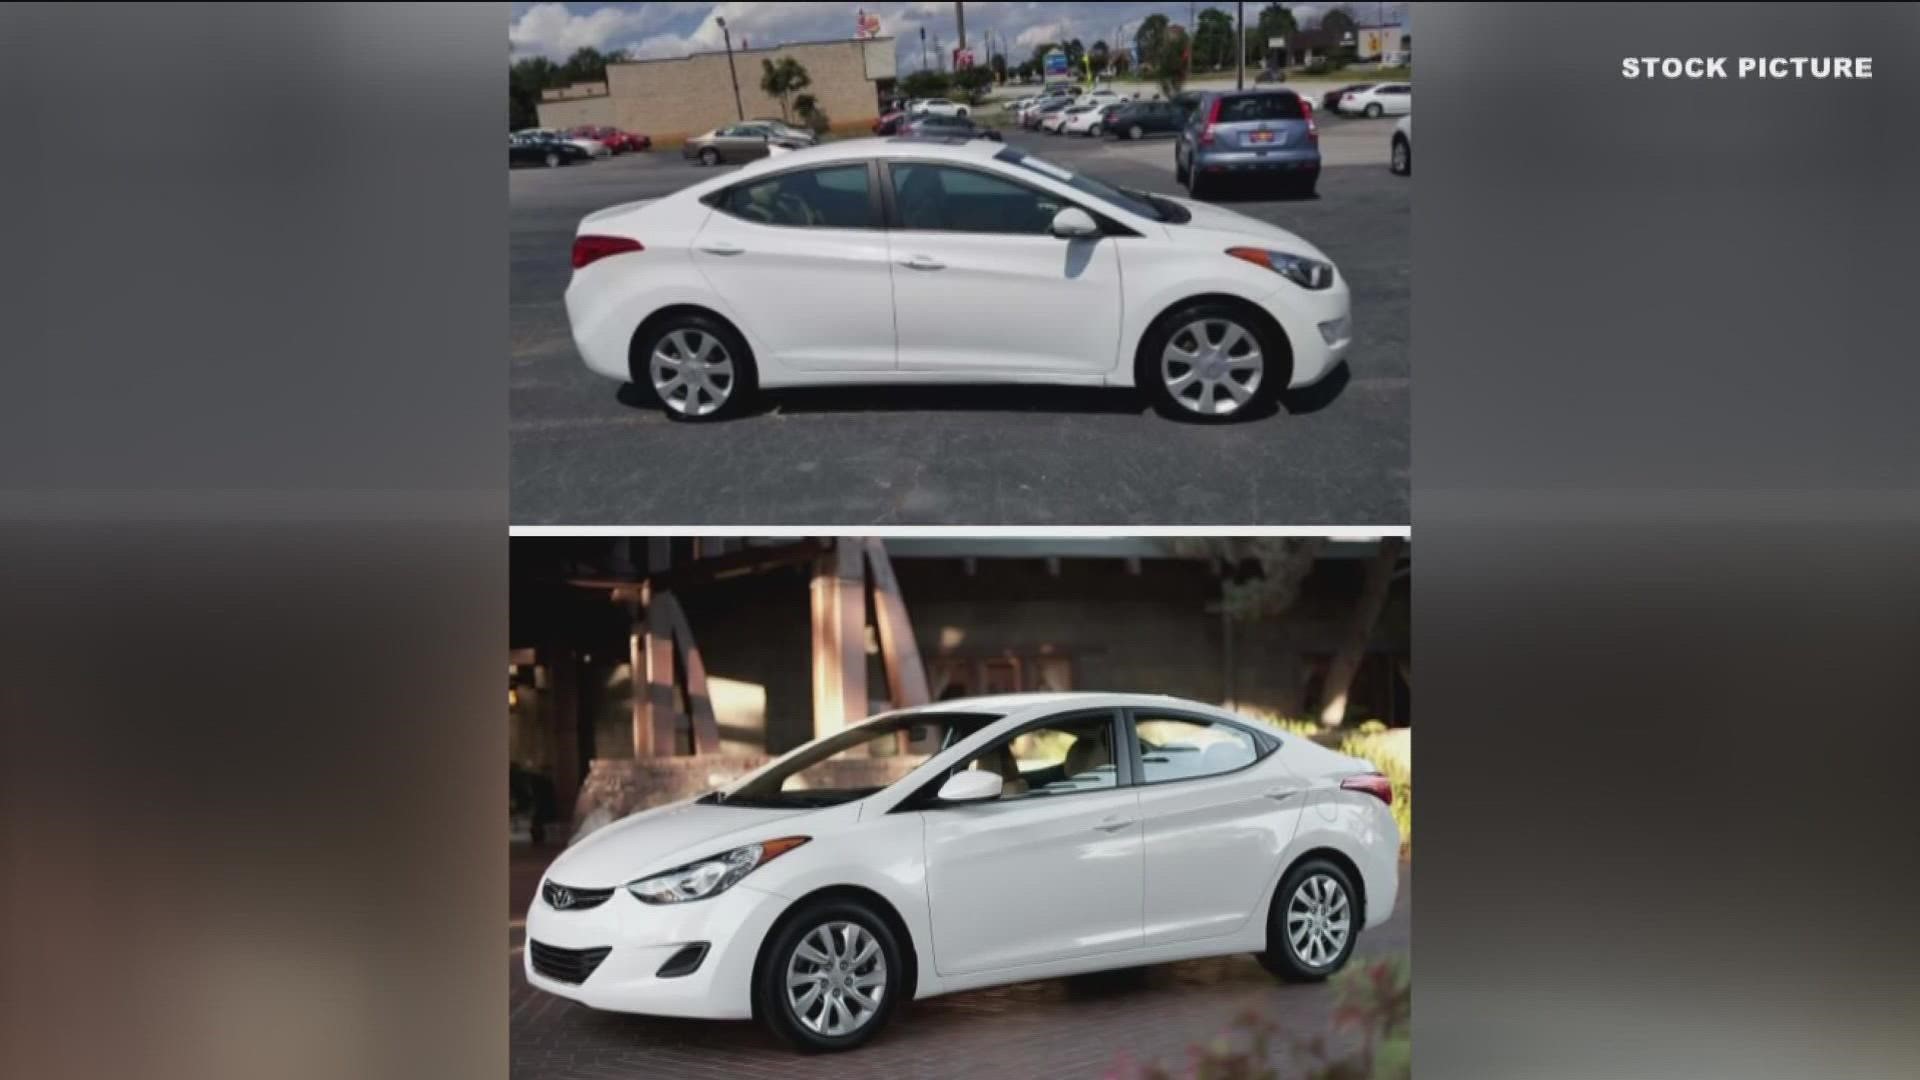 Detectives are interested in speaking with the drivers of a white 2011-2013 Hyundai Elantra, with an unknown license plate.